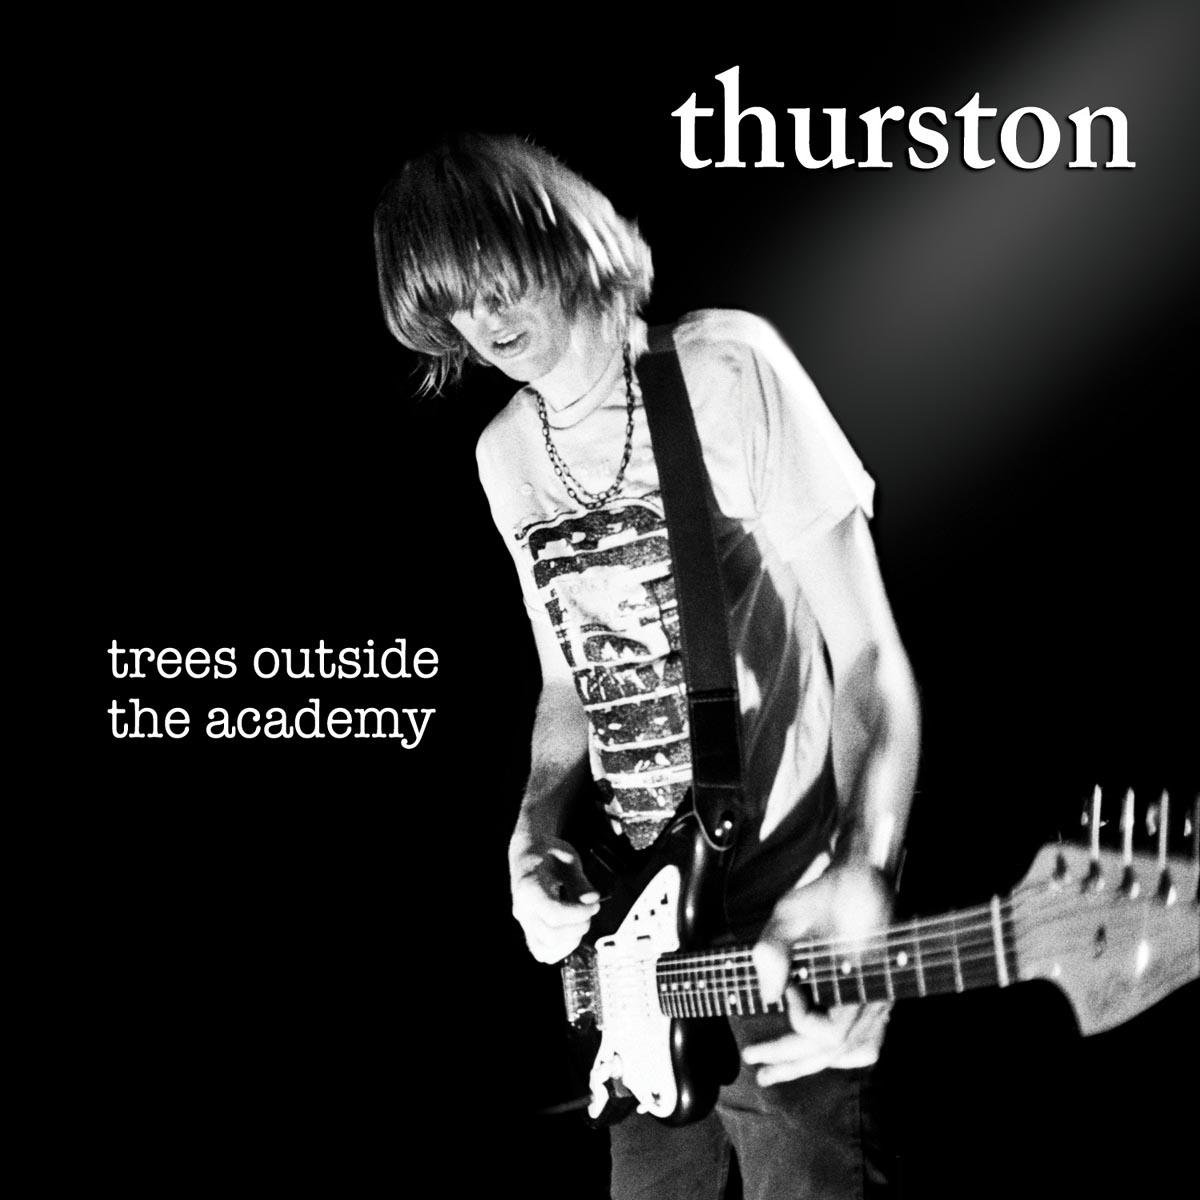 Thurston "Trees outside the academy" LP